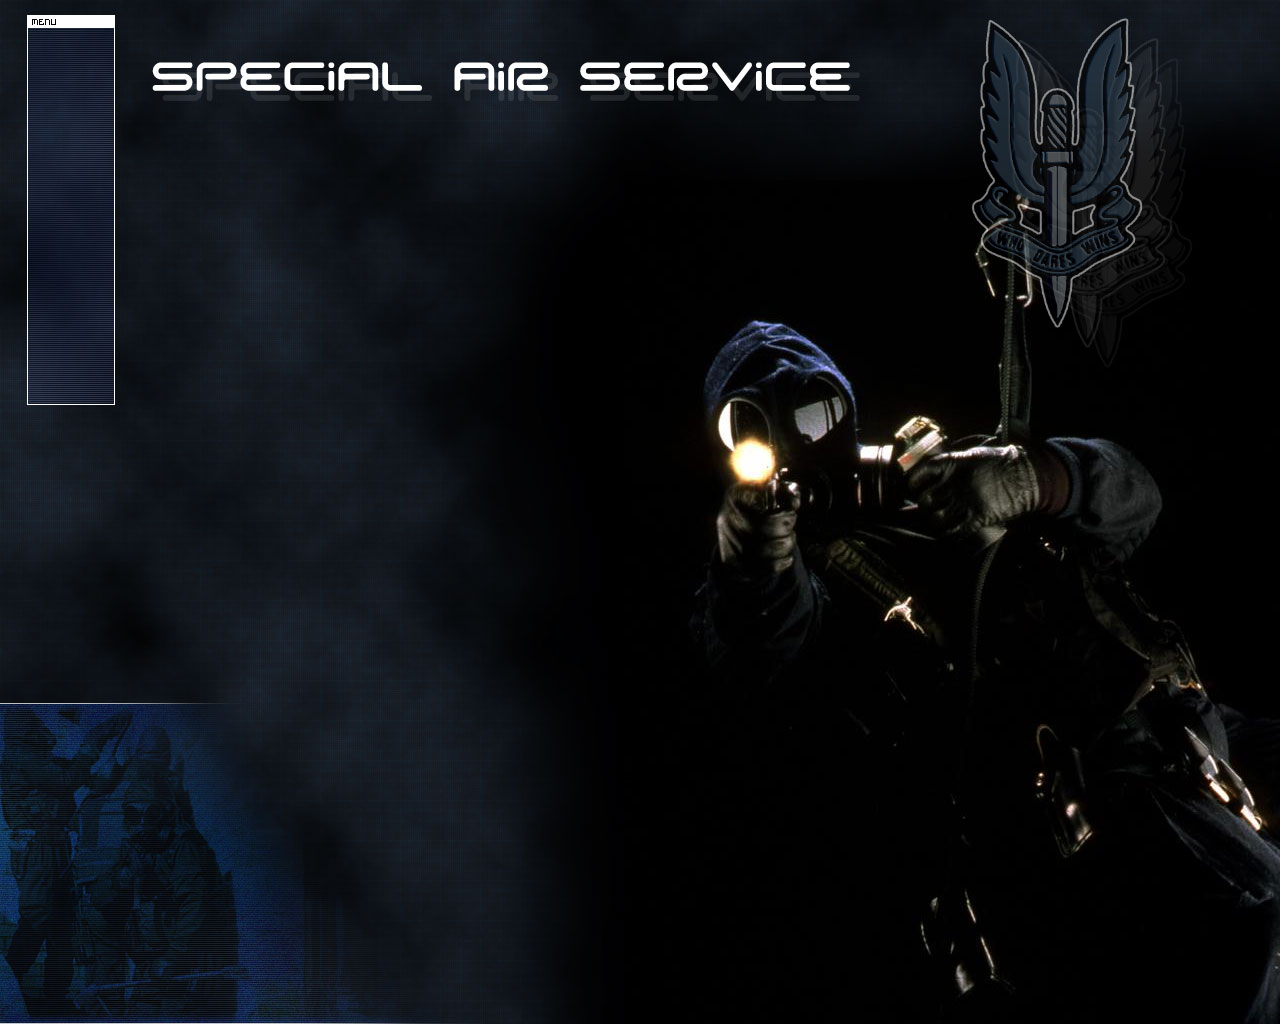 Sas wallpaper by fistach on